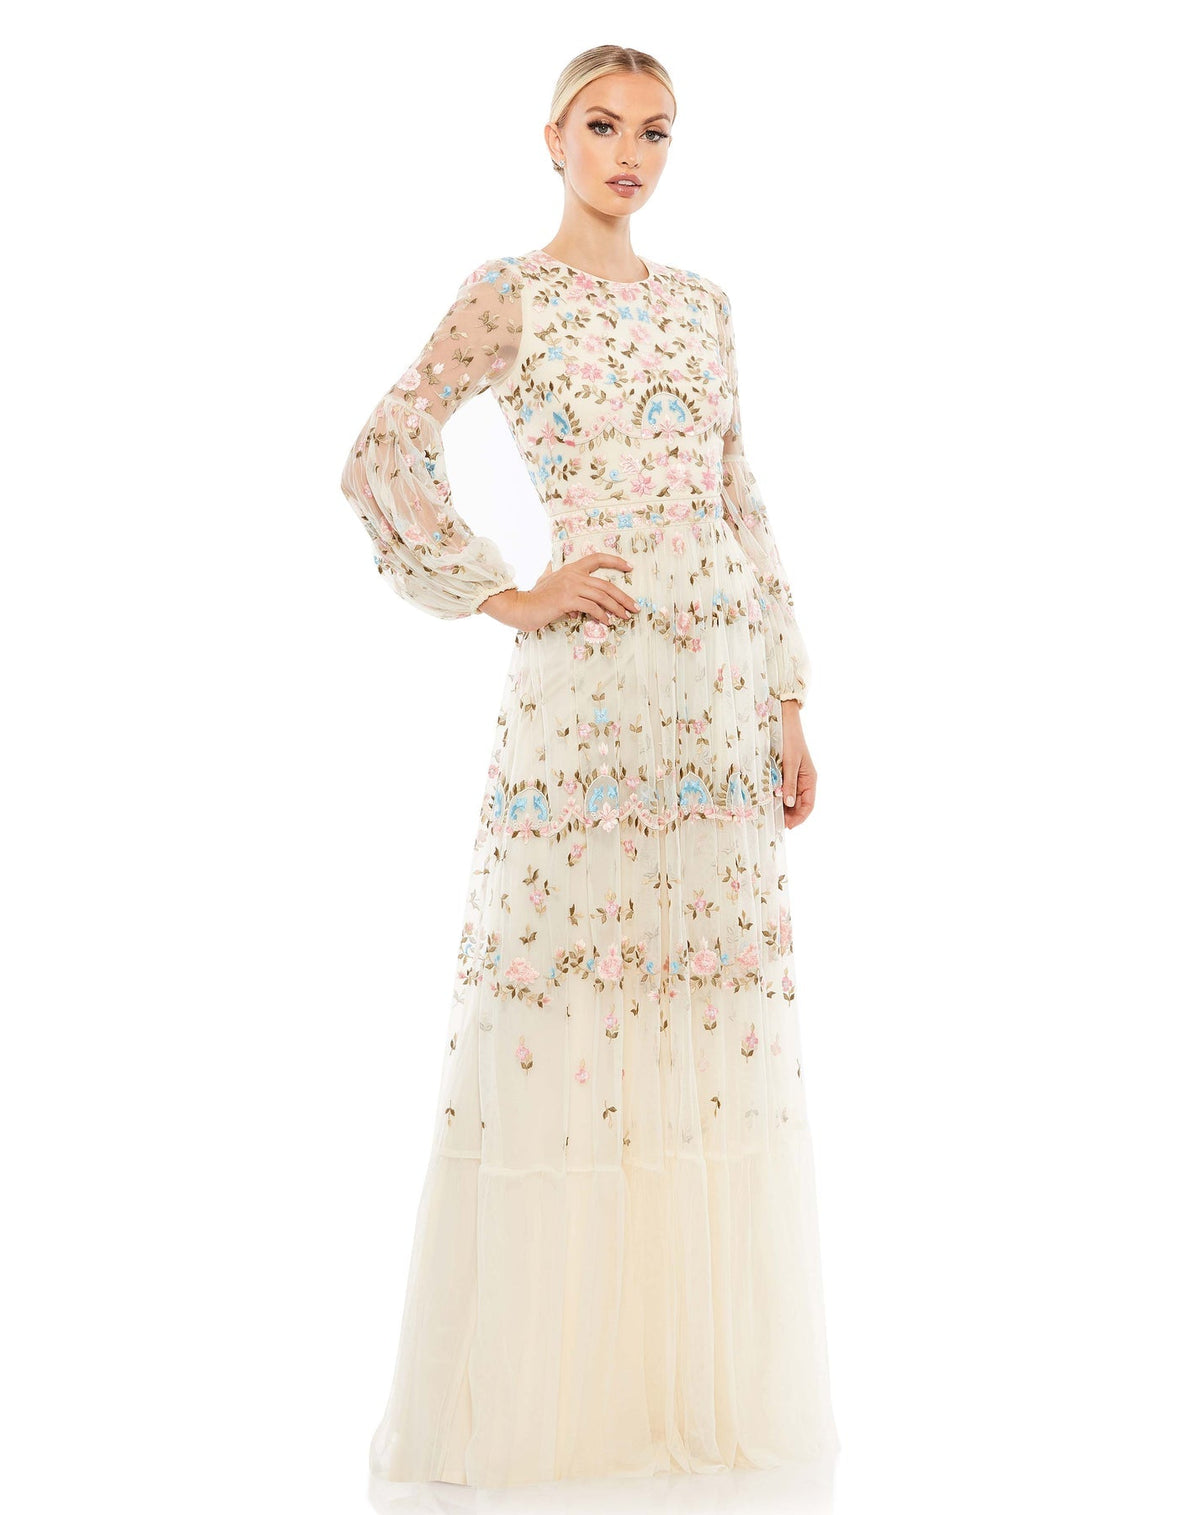 EMBROIDERED BLOUSON SLEEVE GOWN, mac duggal, Style #35111, ivory